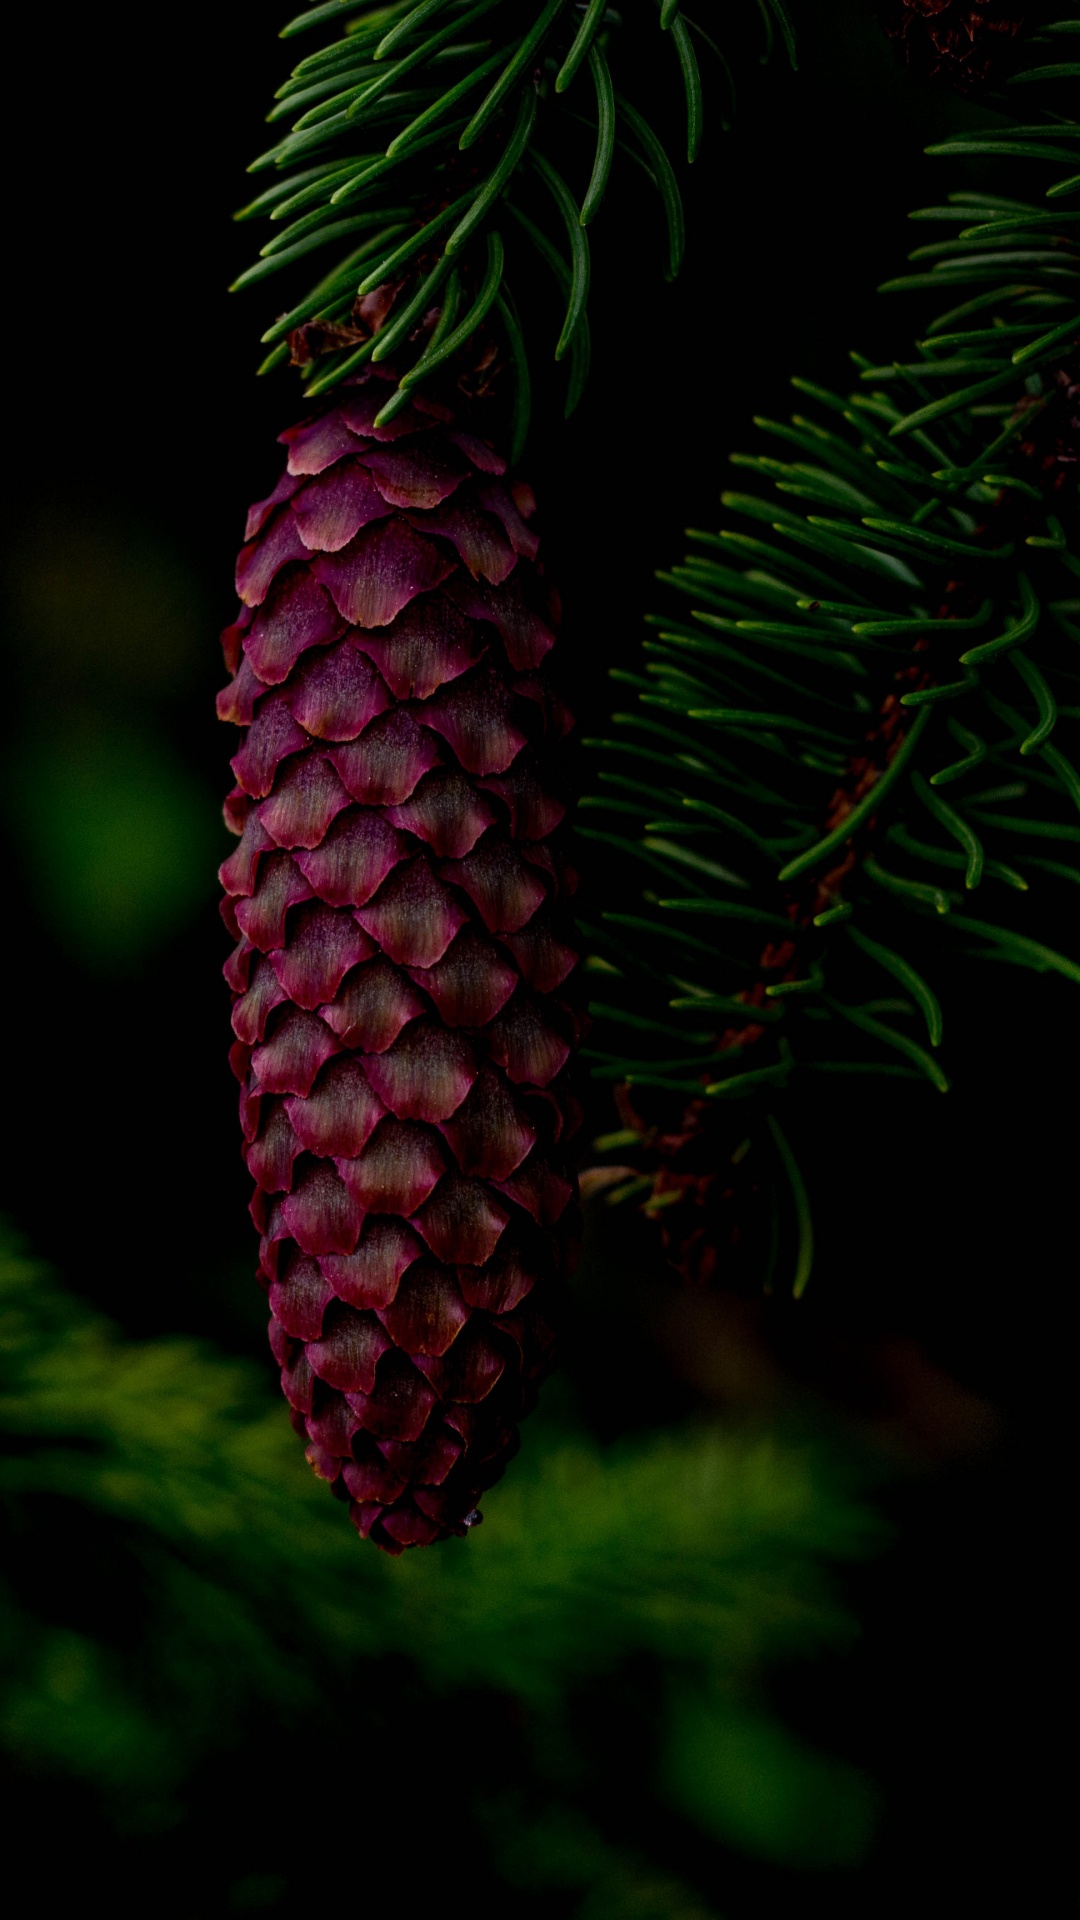 Red Pine Cone on Green Pine Tree. Wallpaper in 1080x1920 Resolution